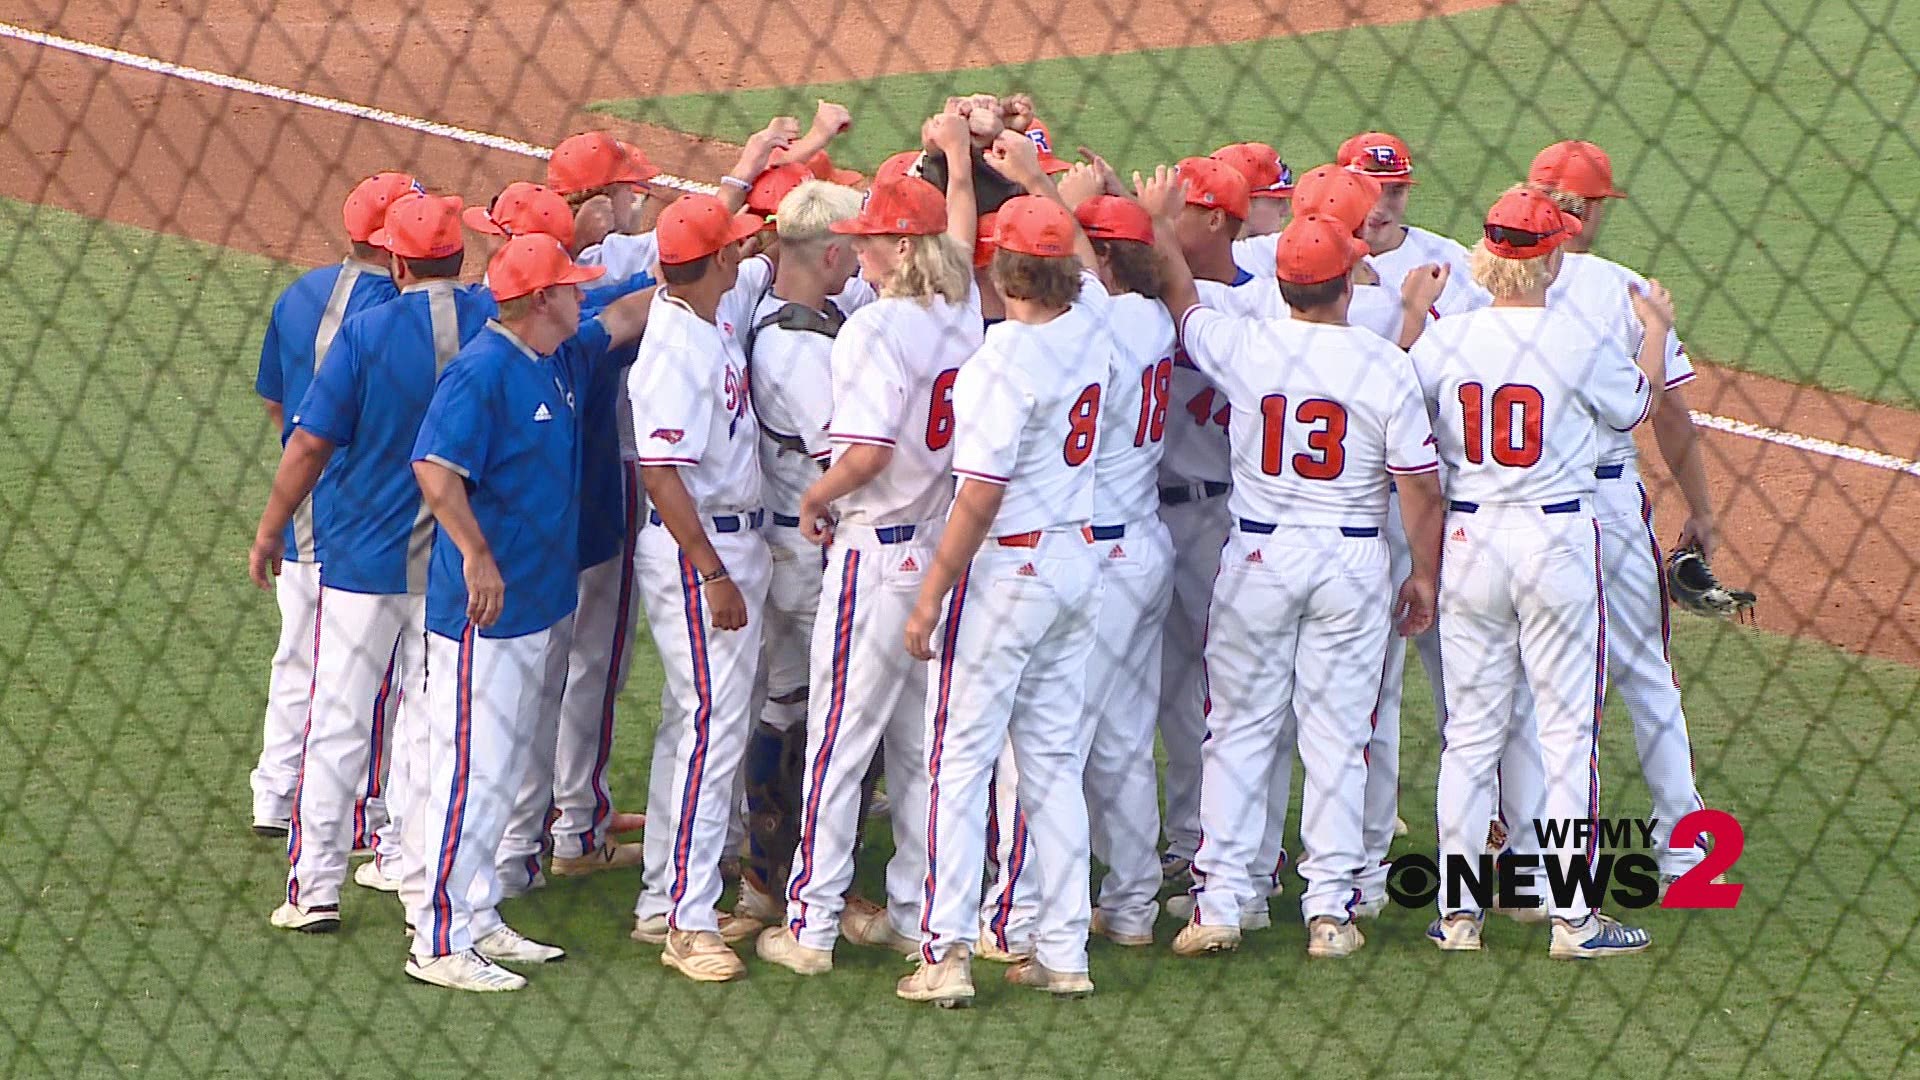 Randleman will try to close out the series with a victory in Game 2 of the Best-of-Three 2A State Championship Series Saturday at 2:00 p.m